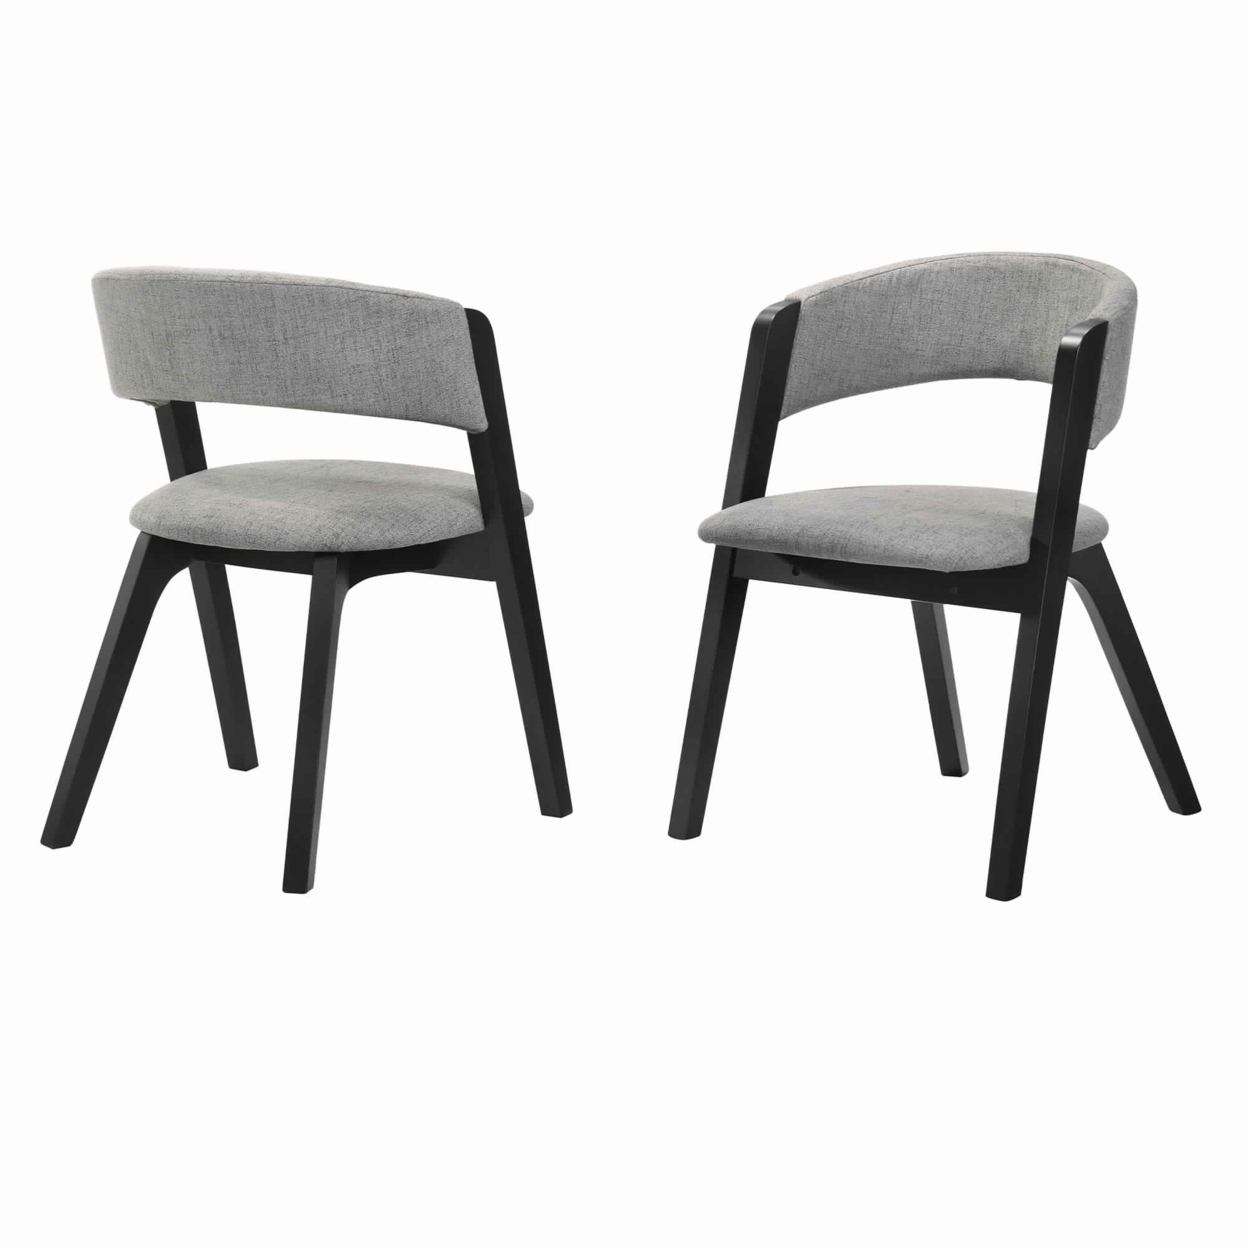 Fabric Upholstered Round Back Wood Dining Chair, Set Of 2, Black And Gray- Saltoro Sherpi